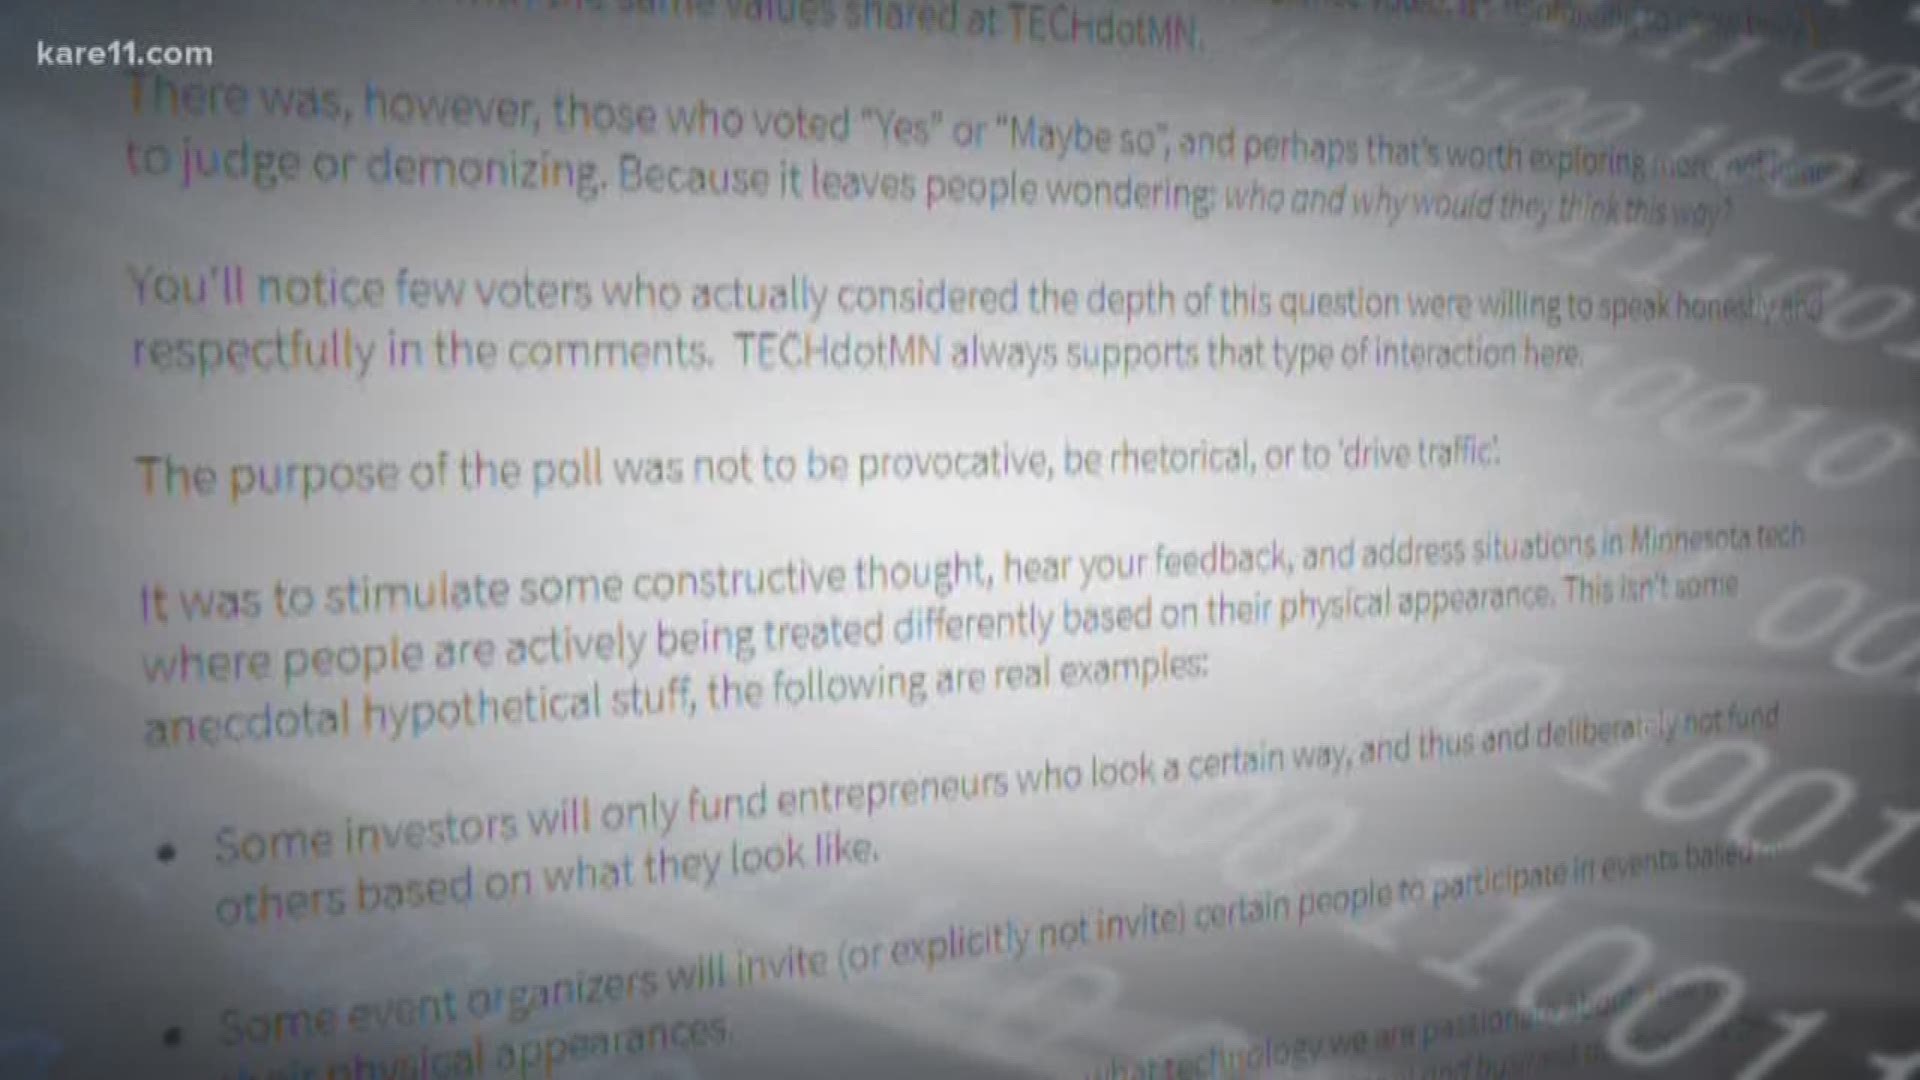 A poll on Tech.MN asked its readers, "Should Minnesota techies be treated differently based on their appearance?" Some members of the Minnesota tech community expressed outrage. https://kare11.tv/2xQrgbh